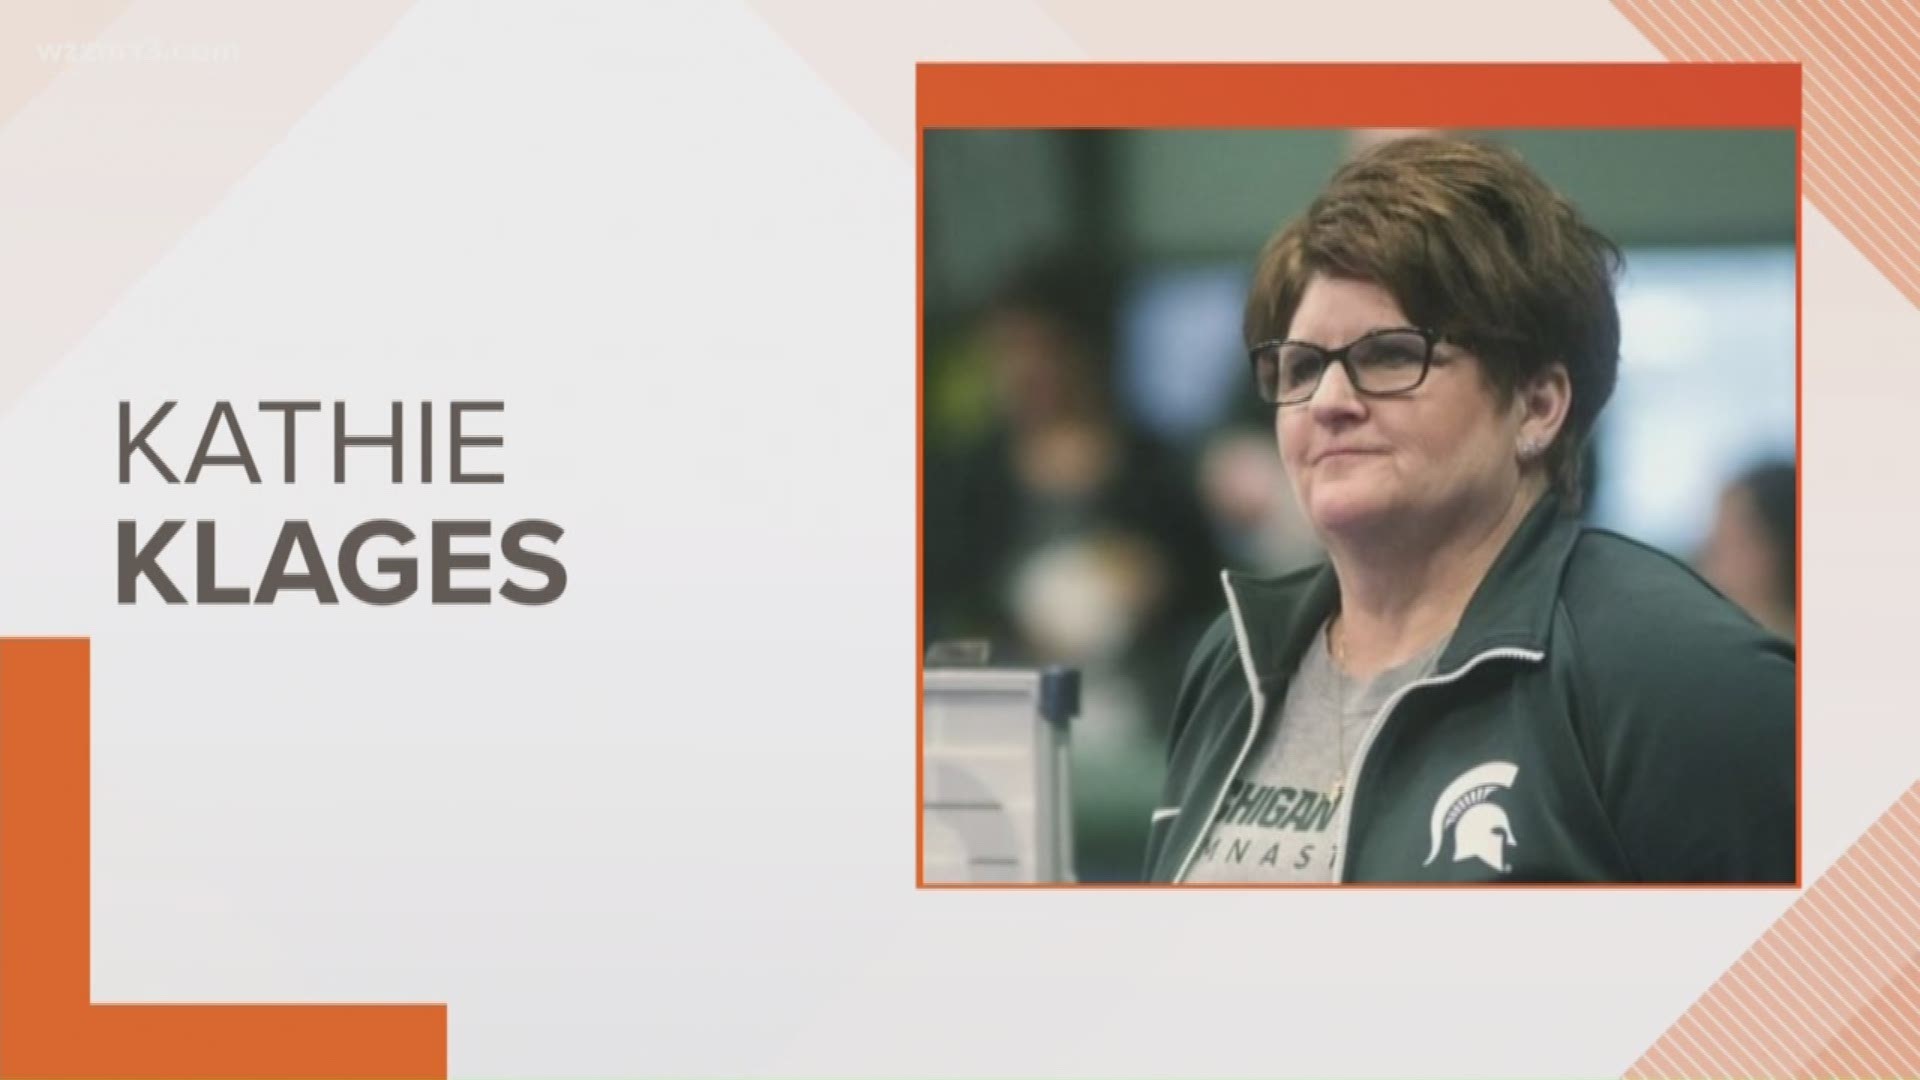 Former MSU Gymnastics coach charged with lying to police about Nassar allegations